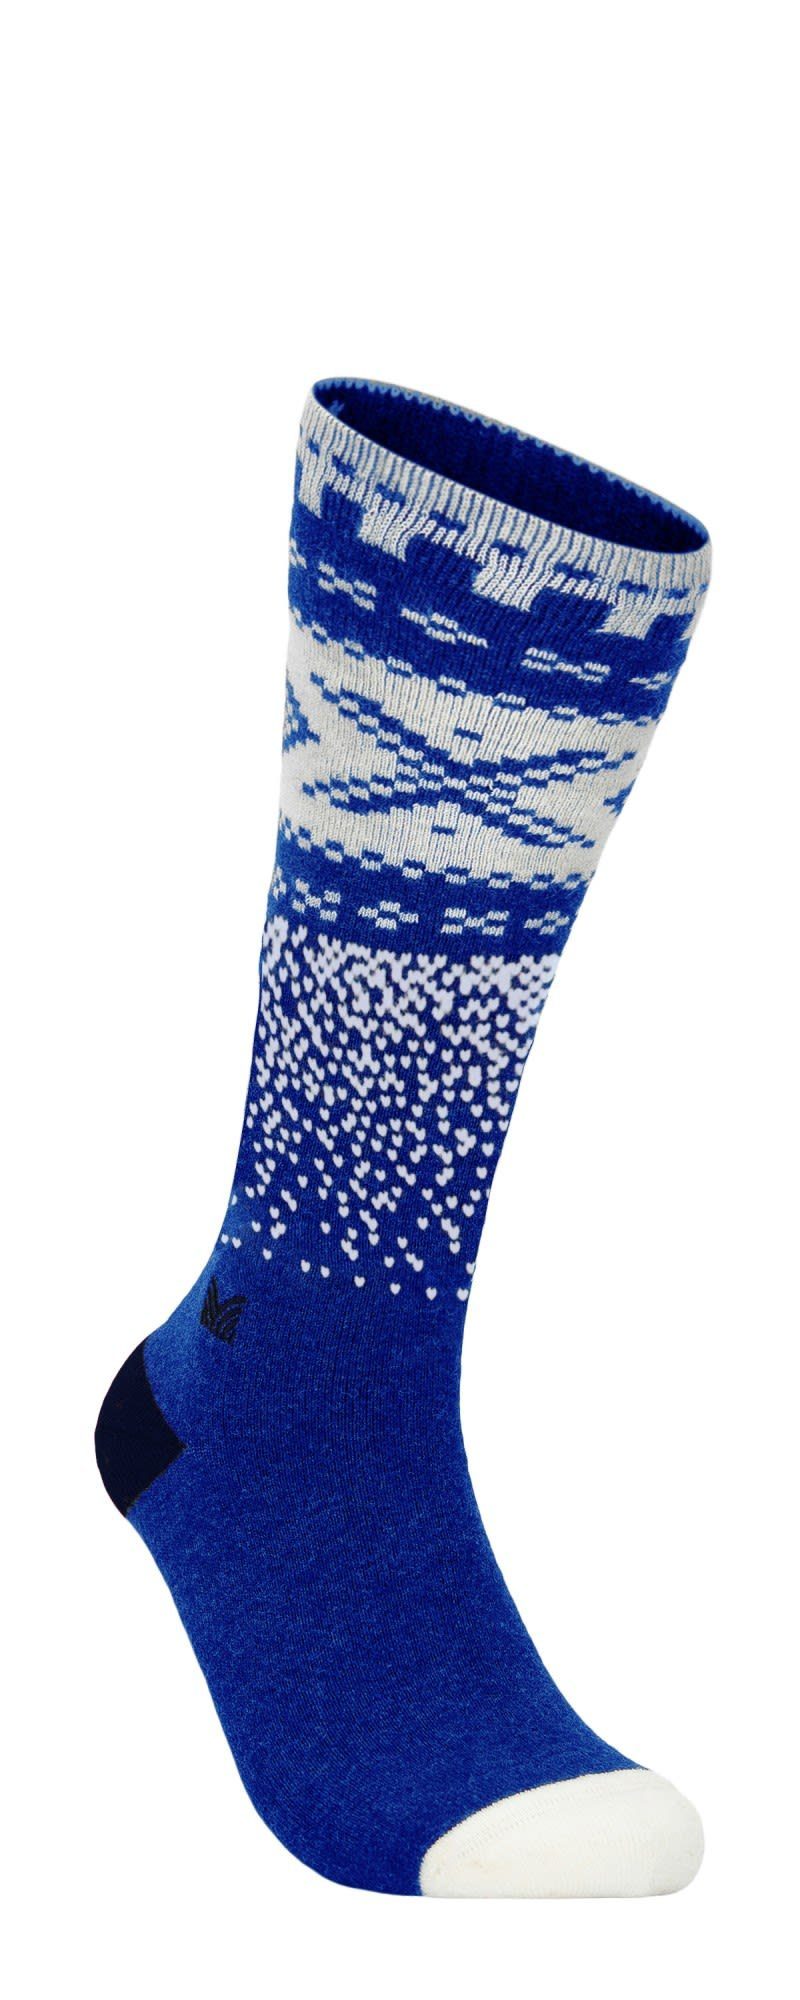 Dale of Norway Thermosocken Offwhite - Navy High Cortina Socks Of Dale Ultramarine Norway 